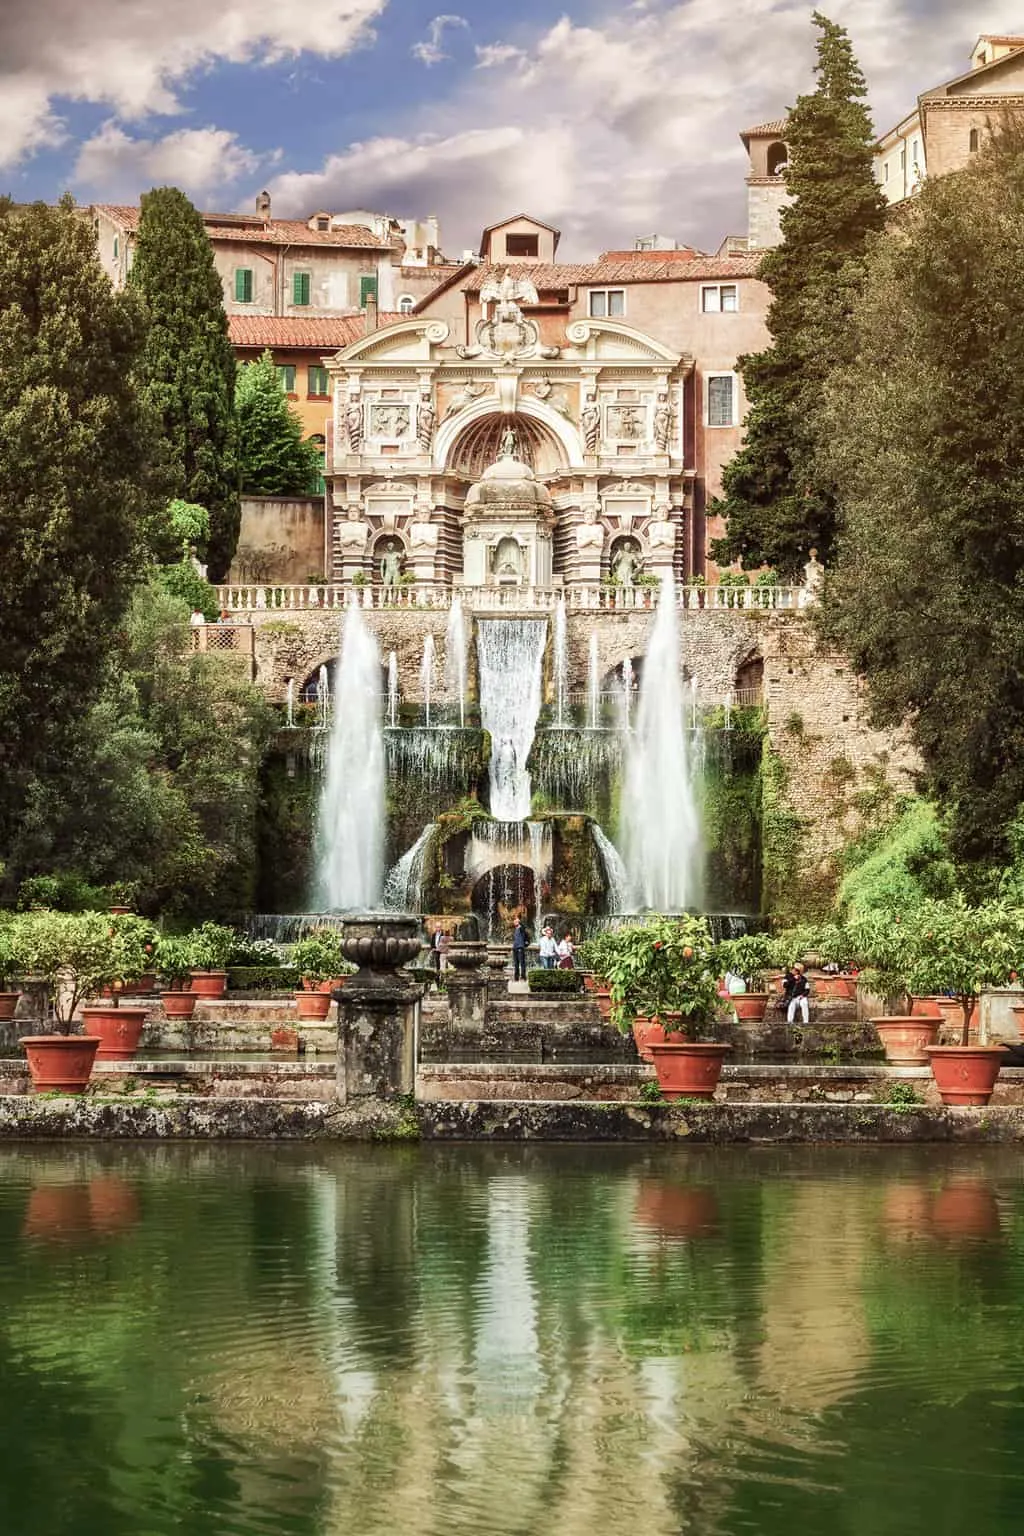 Ornate fountains in front of a large palace overlooking a lake in Italy.